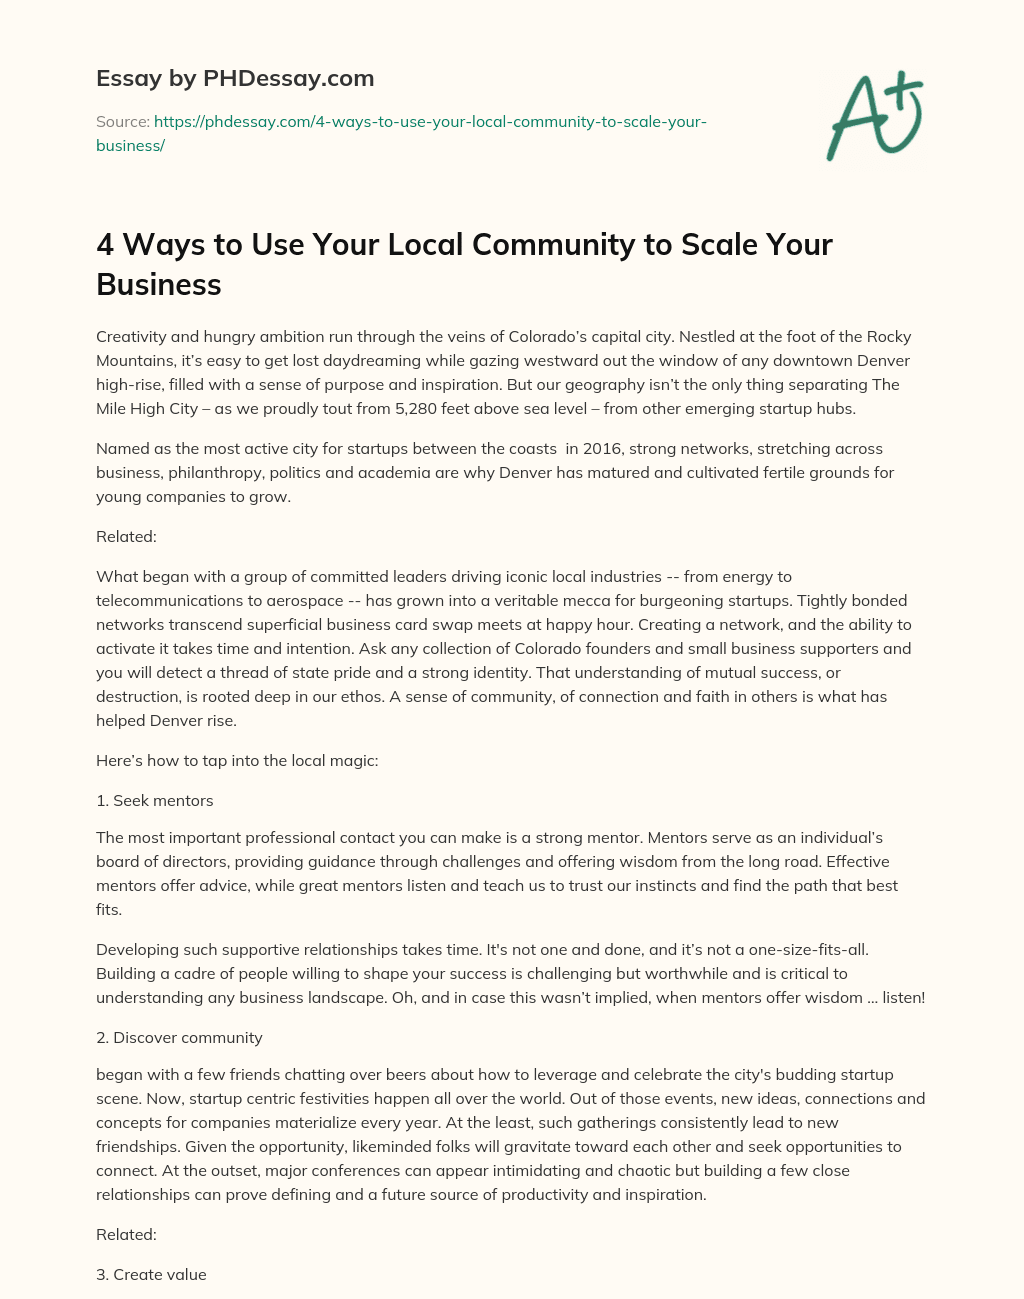 4 Ways to Use Your Local Community to Scale Your Business essay